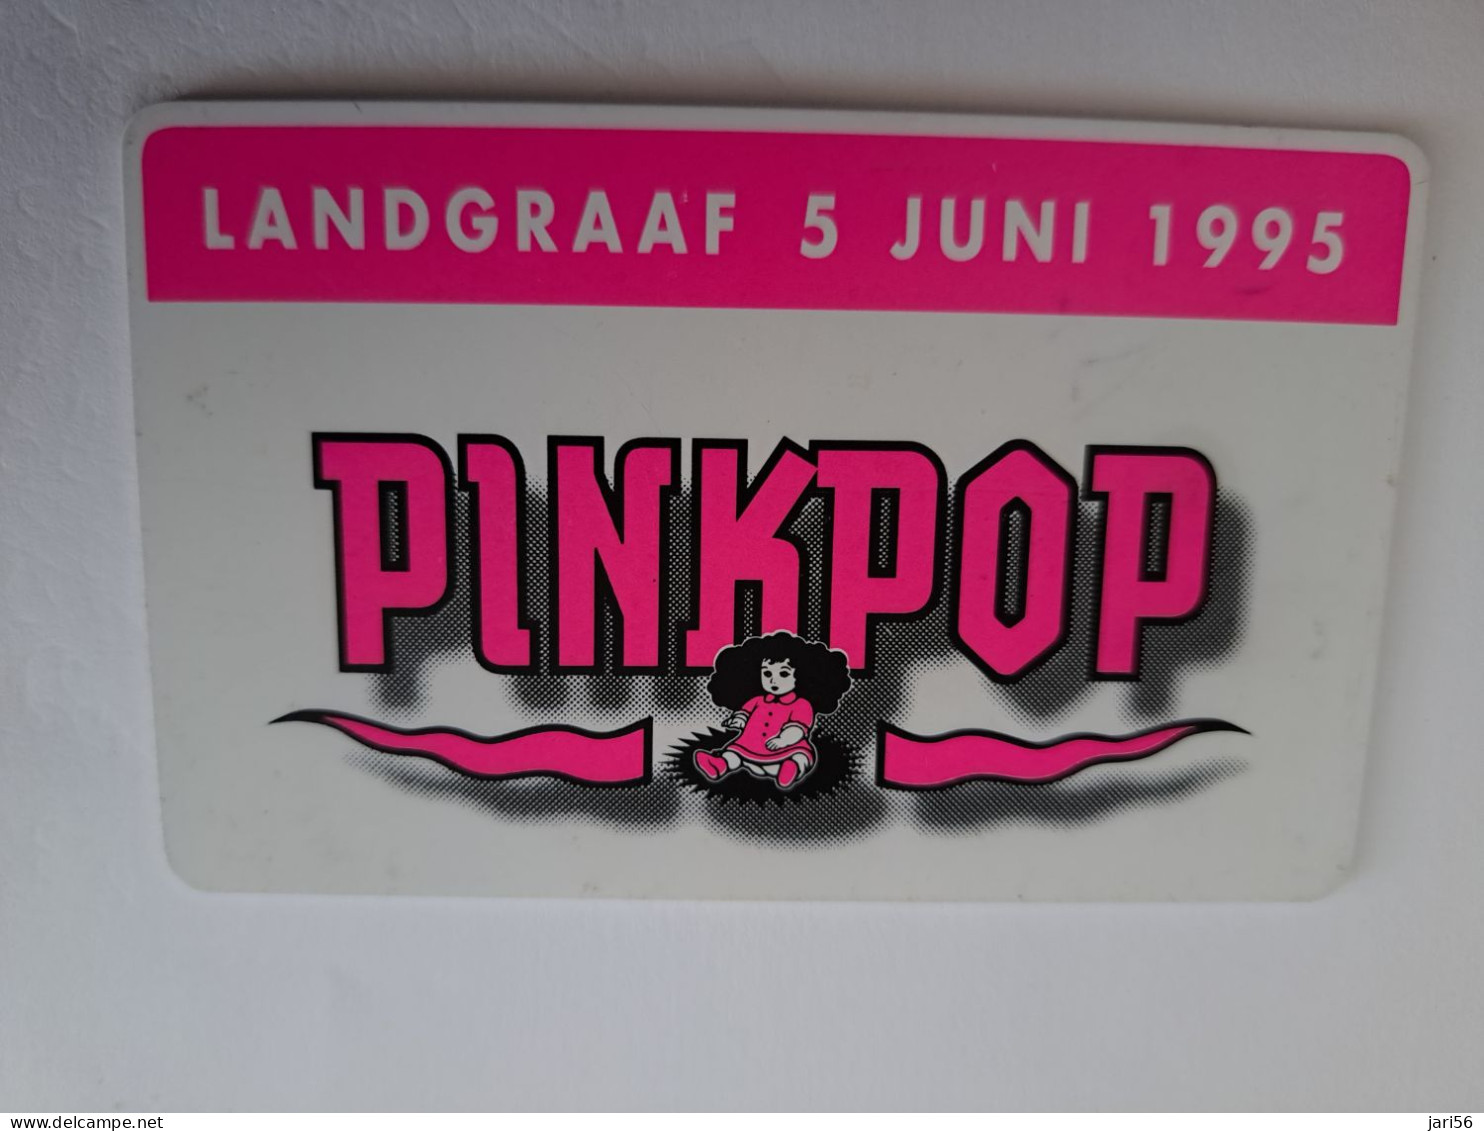 NETHERLANDS / CHIP ADVERTISING CARD/ HFL 5,00  / PINKPOP 1995   /     CRE 161** 14596** - Privadas